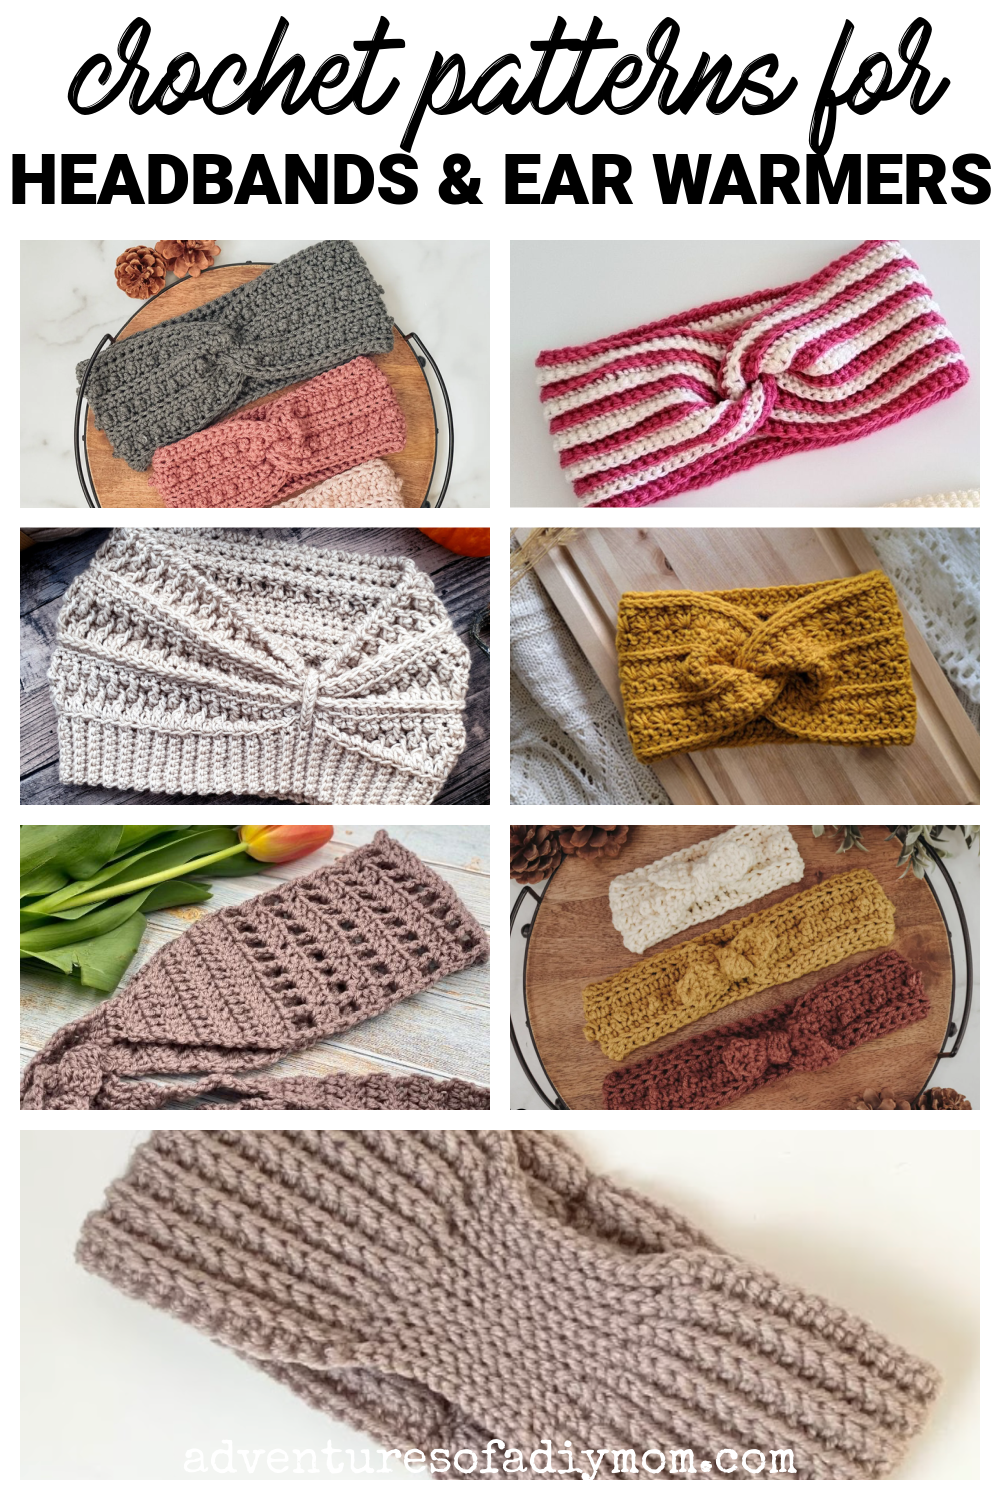 Fall Crochet Patterns Perfect for Cooler Weather - Crochet 365 Knit Too